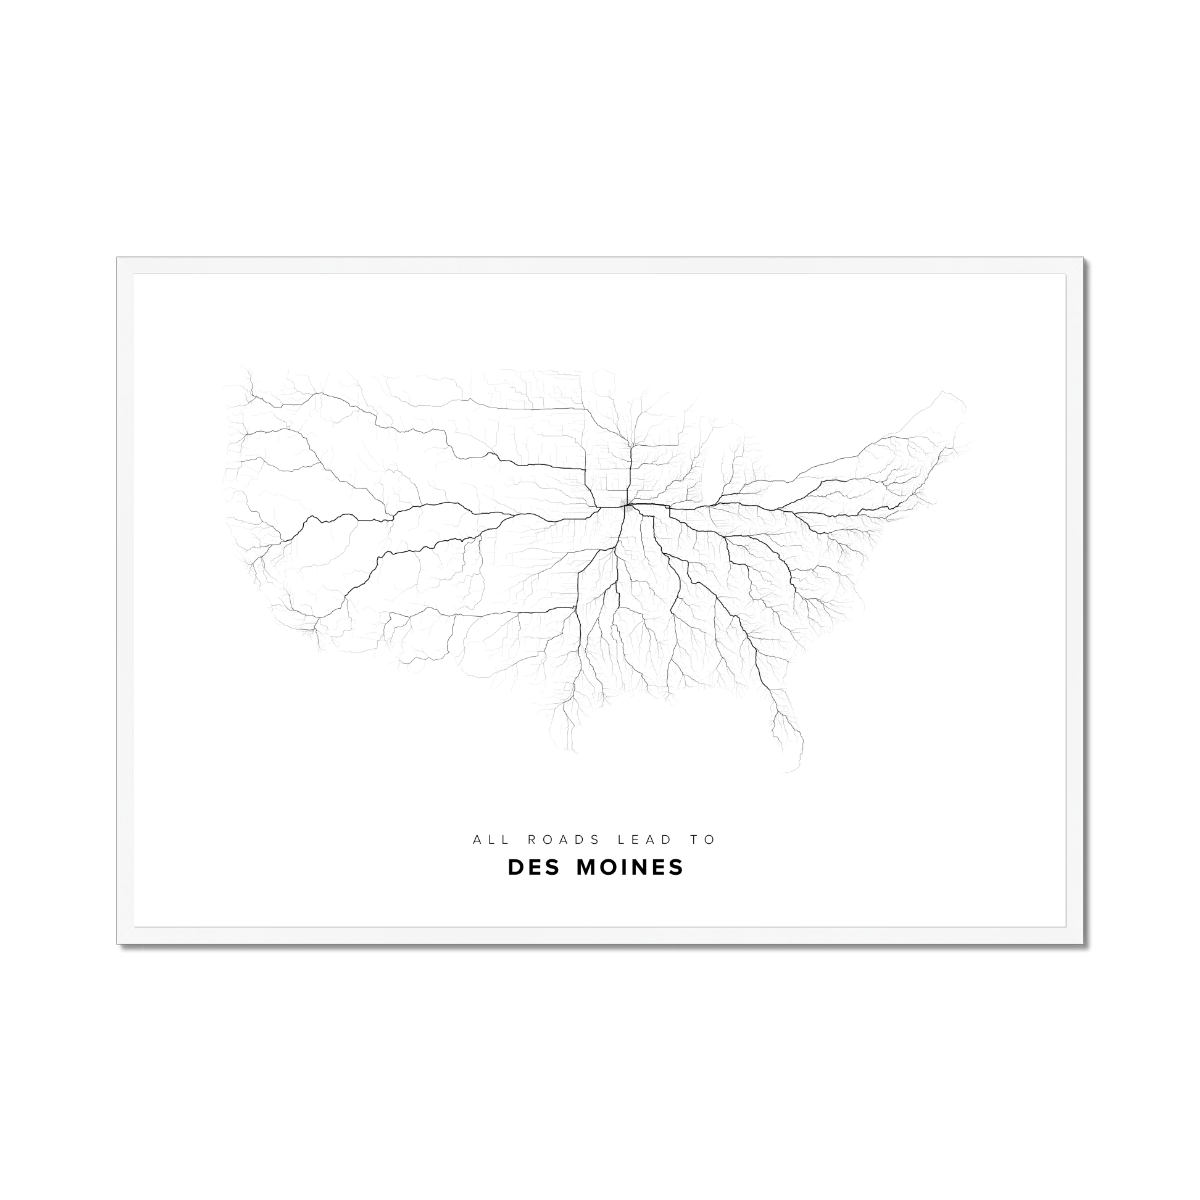 All roads lead to Des Moines (United States of America) Fine Art Map Print